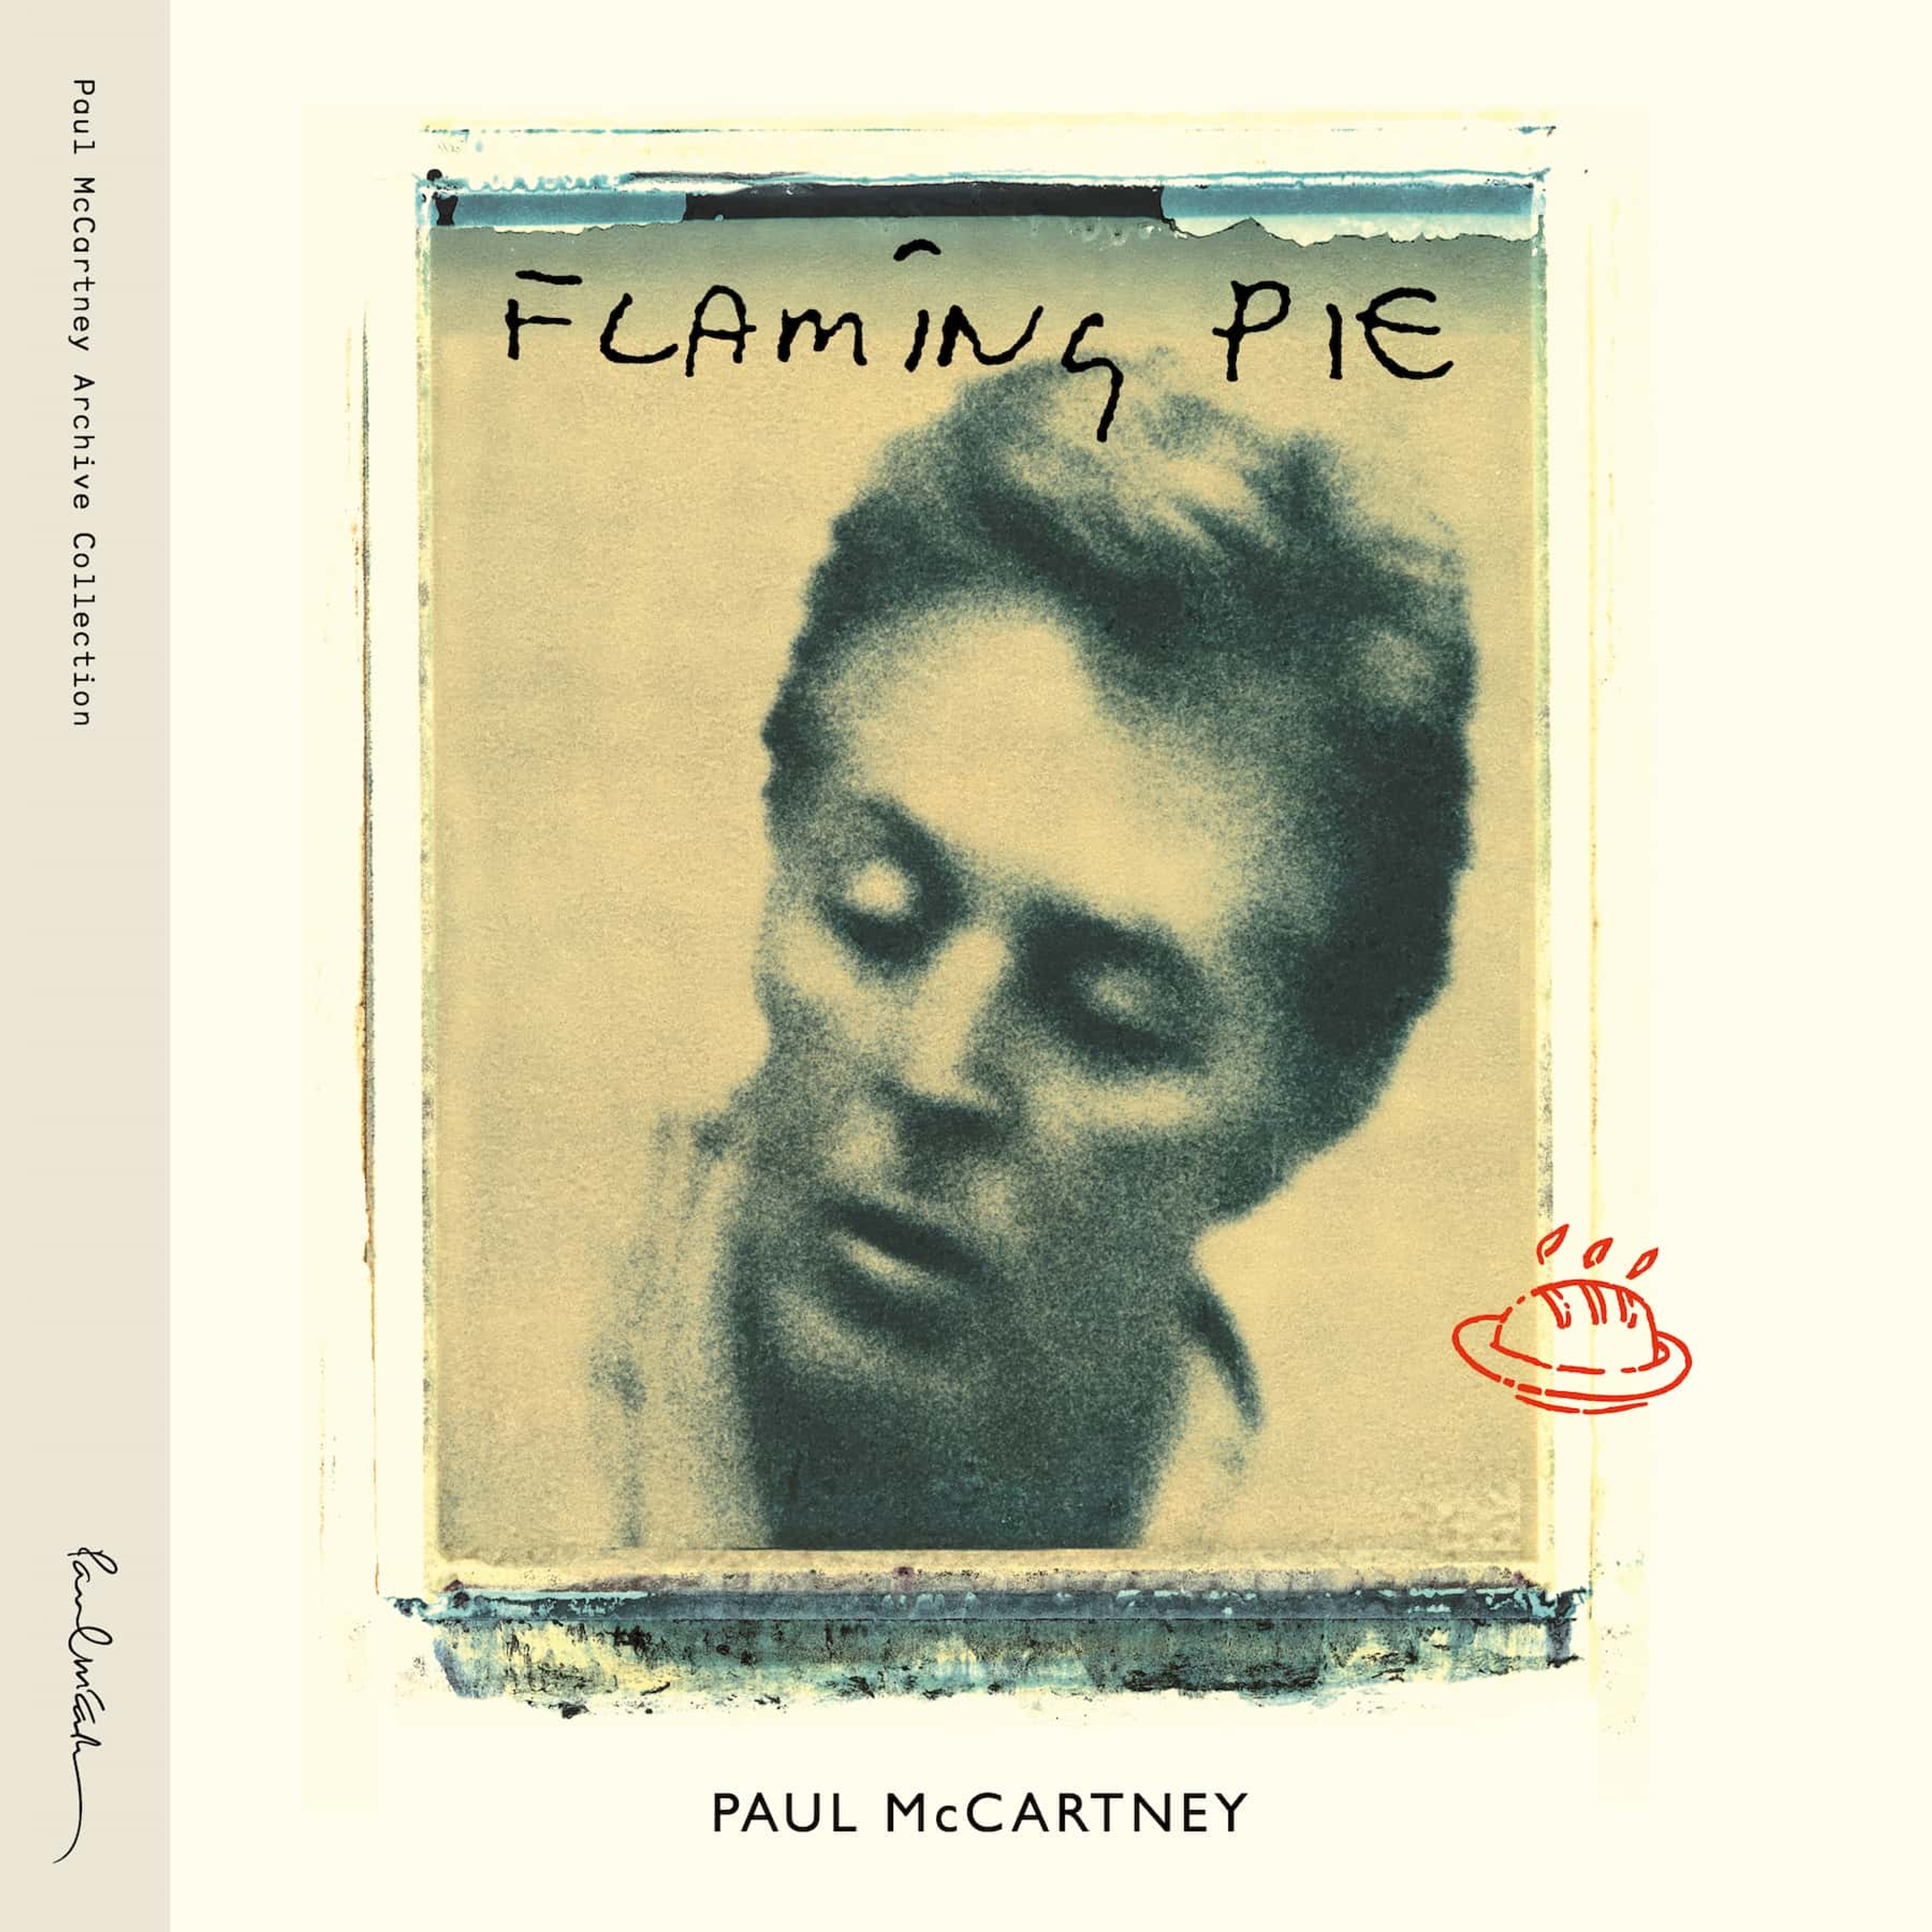 Photo of Flaming Pie (Archive Collection) album artwork which includes a polaroid transfer of Paul McCartney.